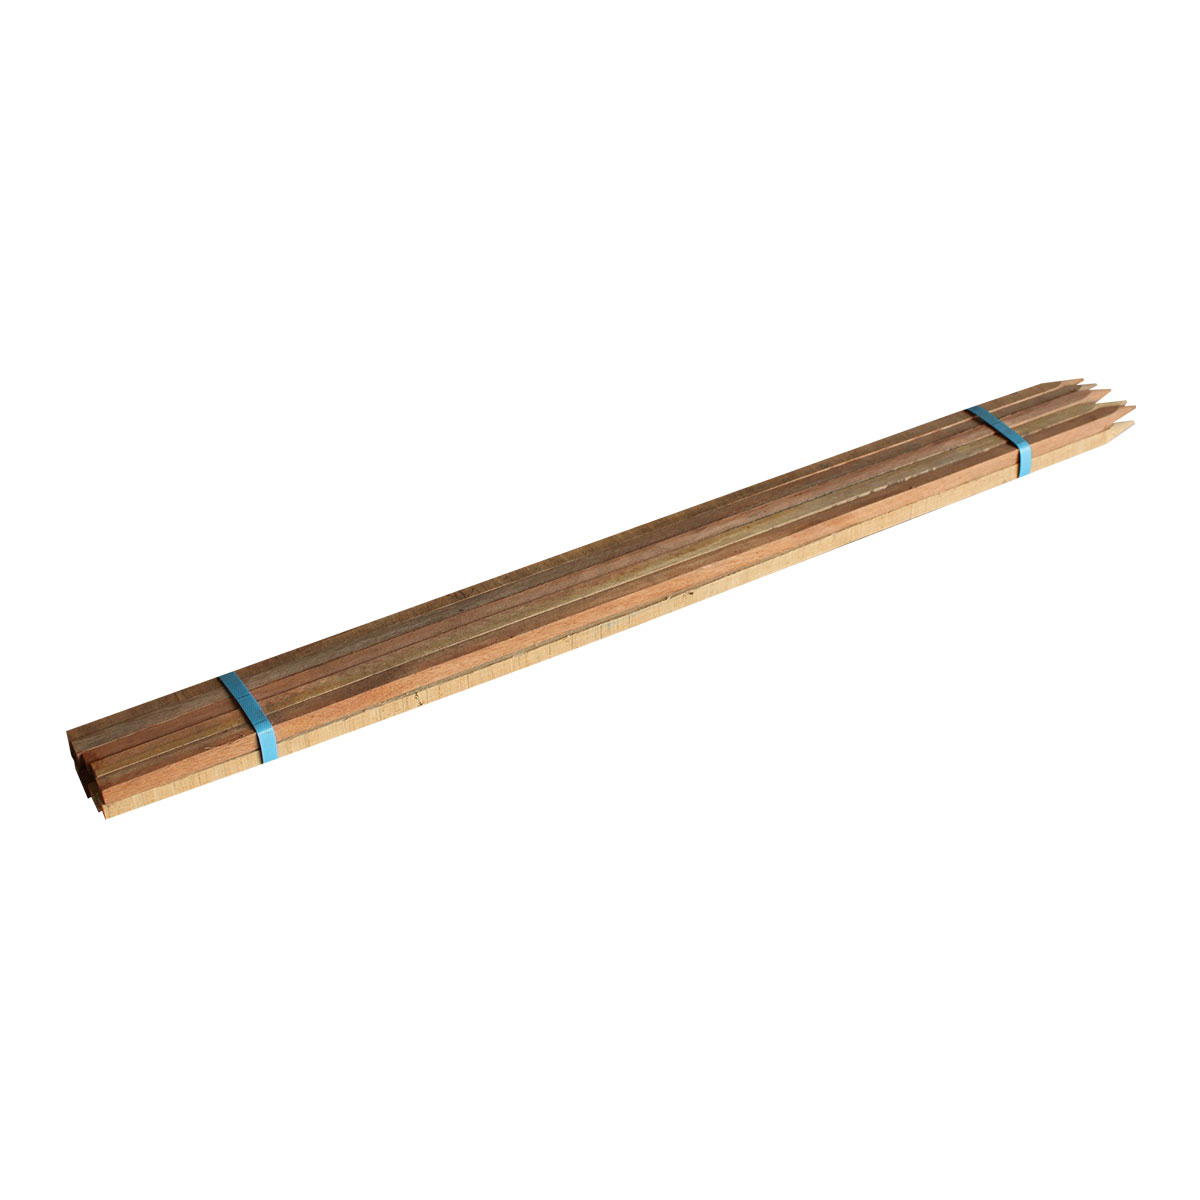 Hardwood Stakes 17 x 17 x 1200mm - 10 Pack